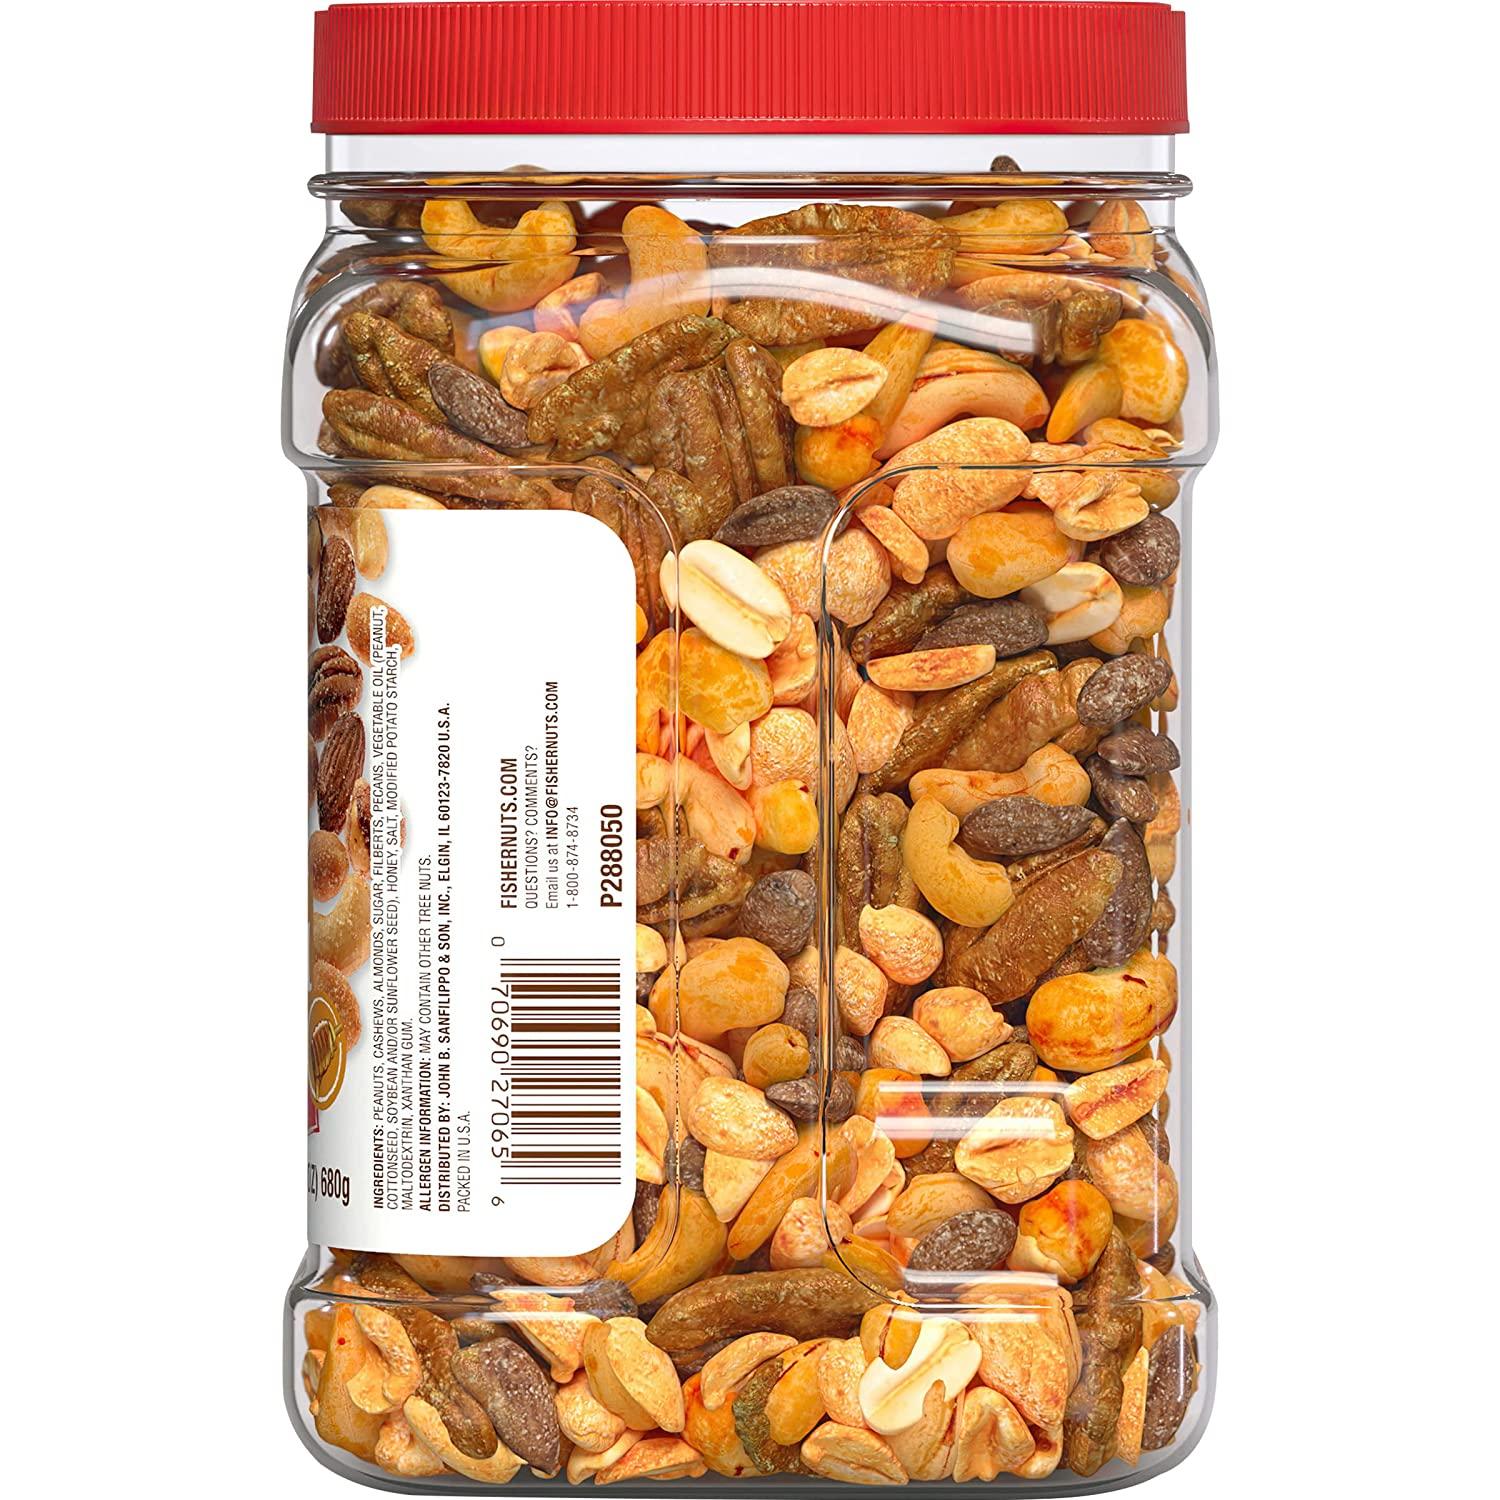 Caramelised Honey Nut Mix in Gift Jar - (475g) on SALE now